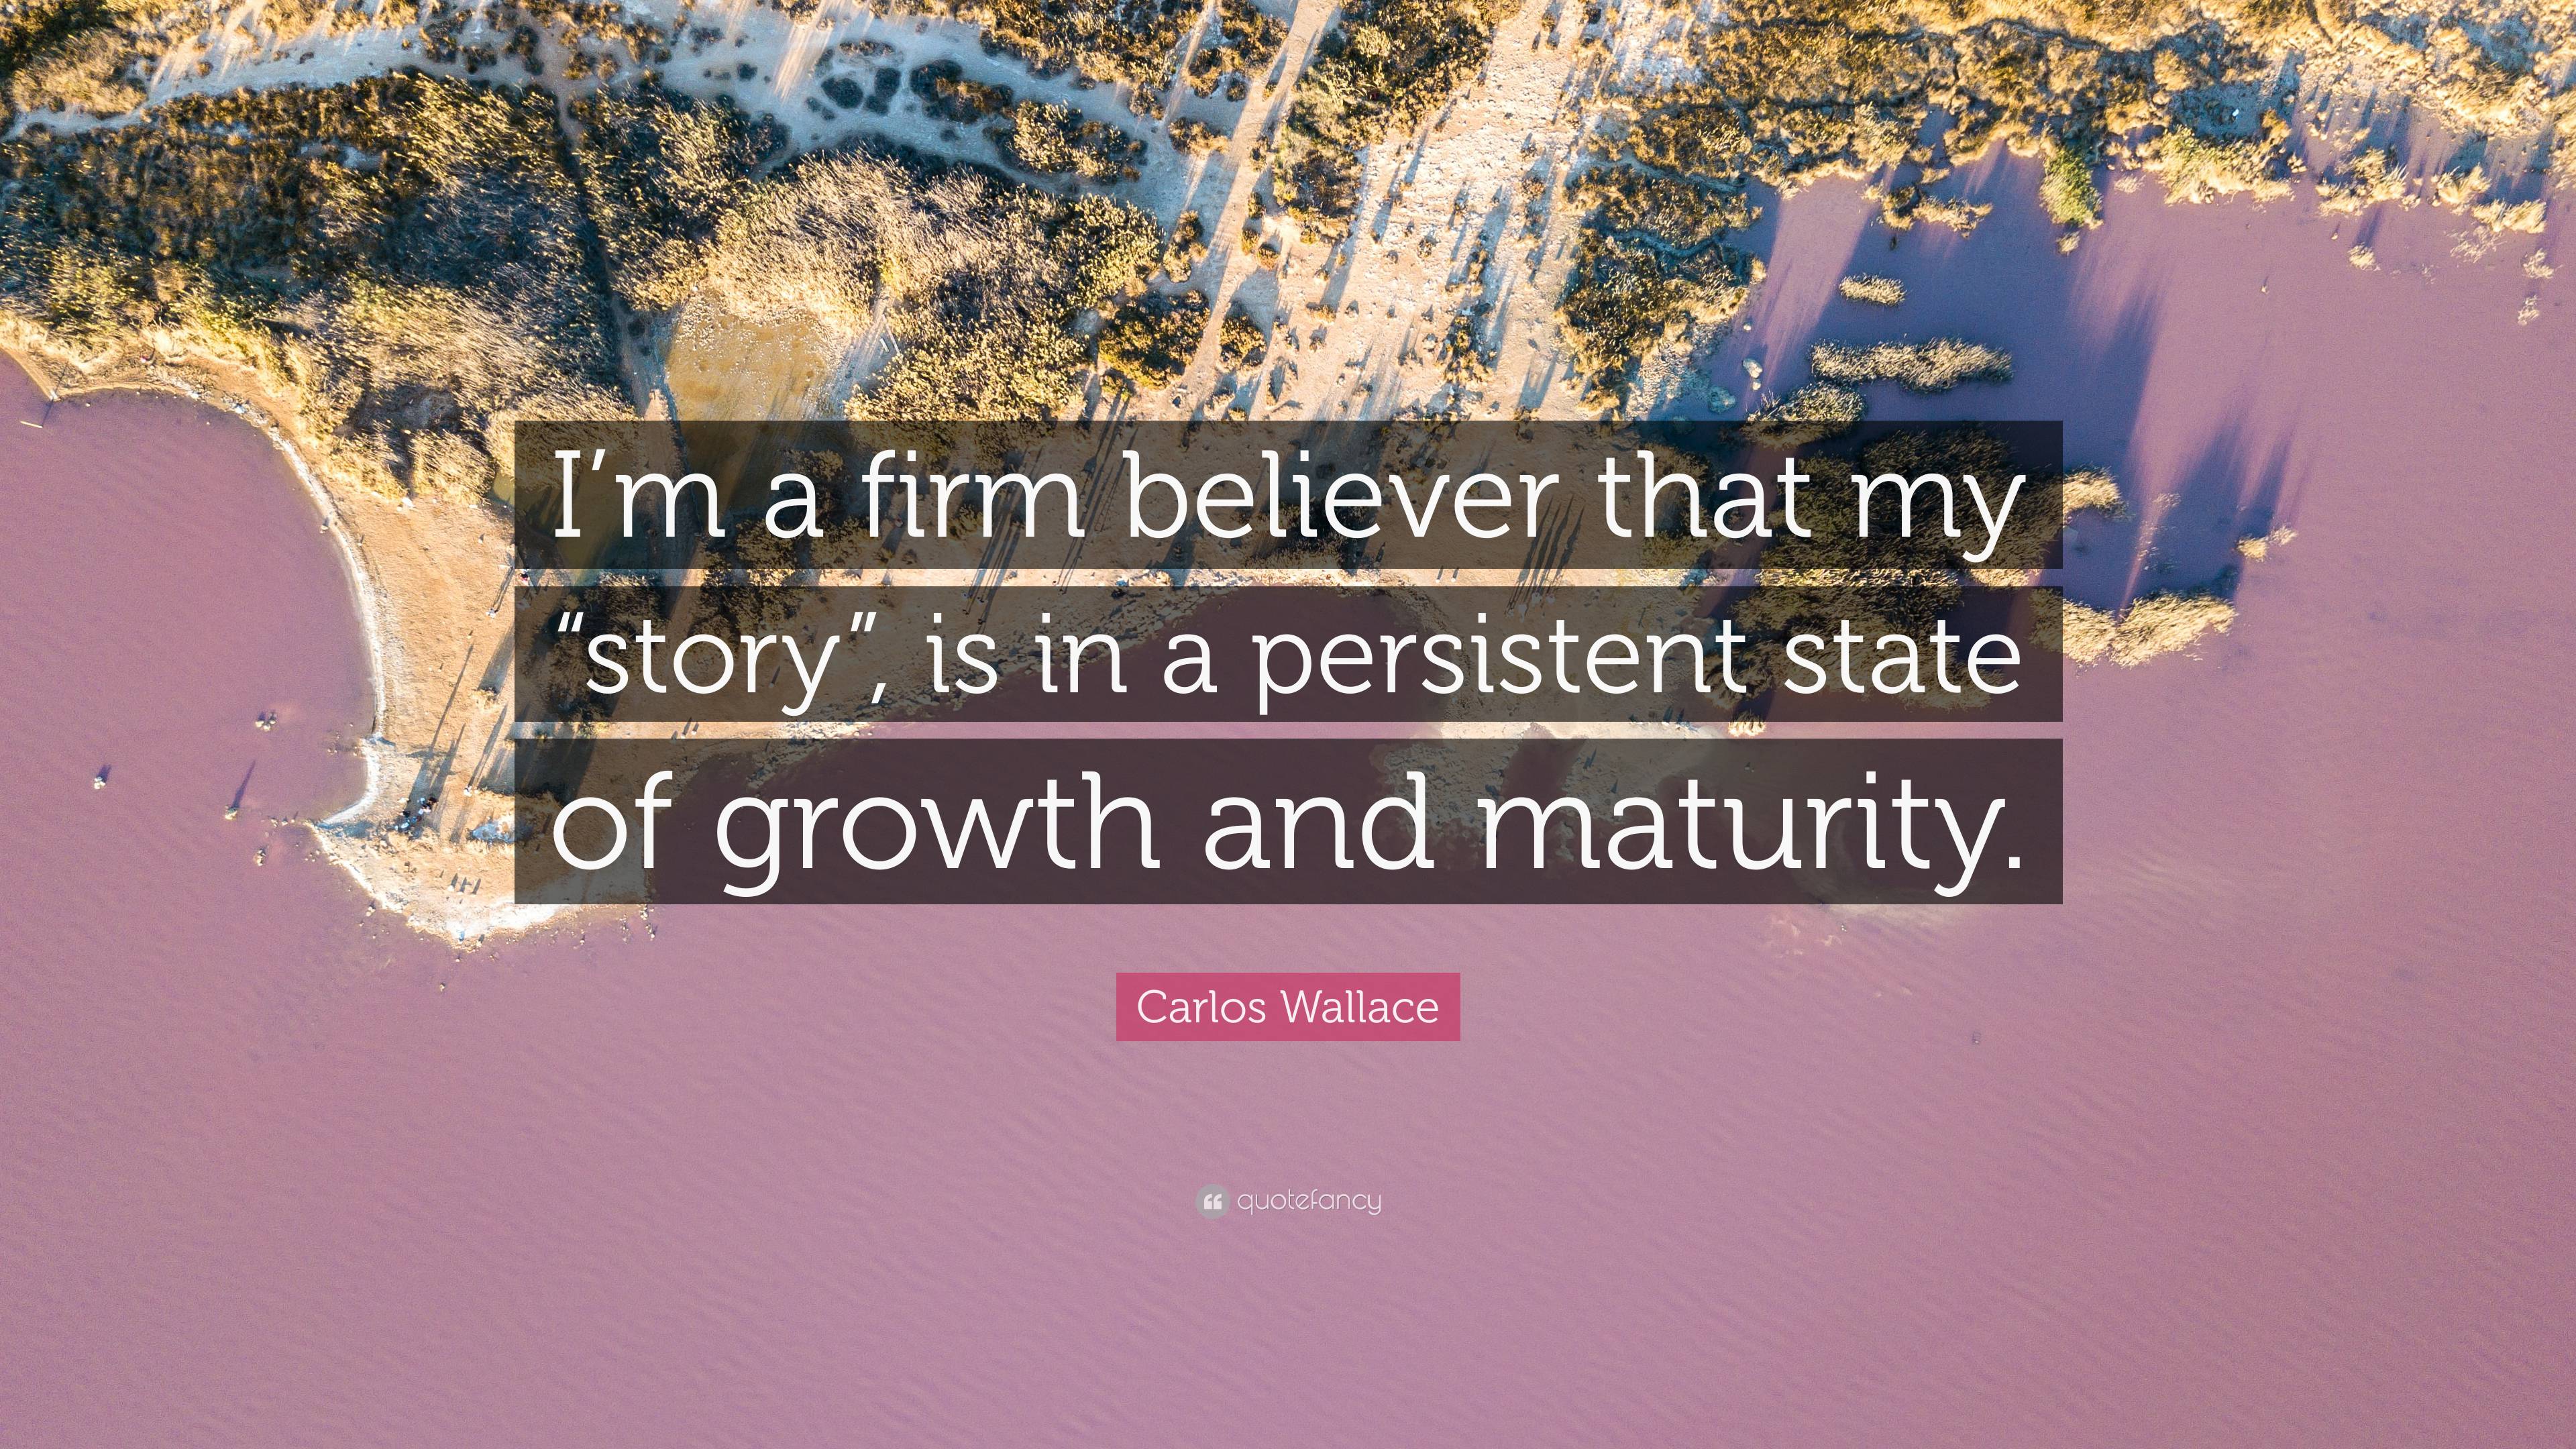 Carlos Wallace Quote: “I'm a firm believer that my “story”, is in a  persistent state